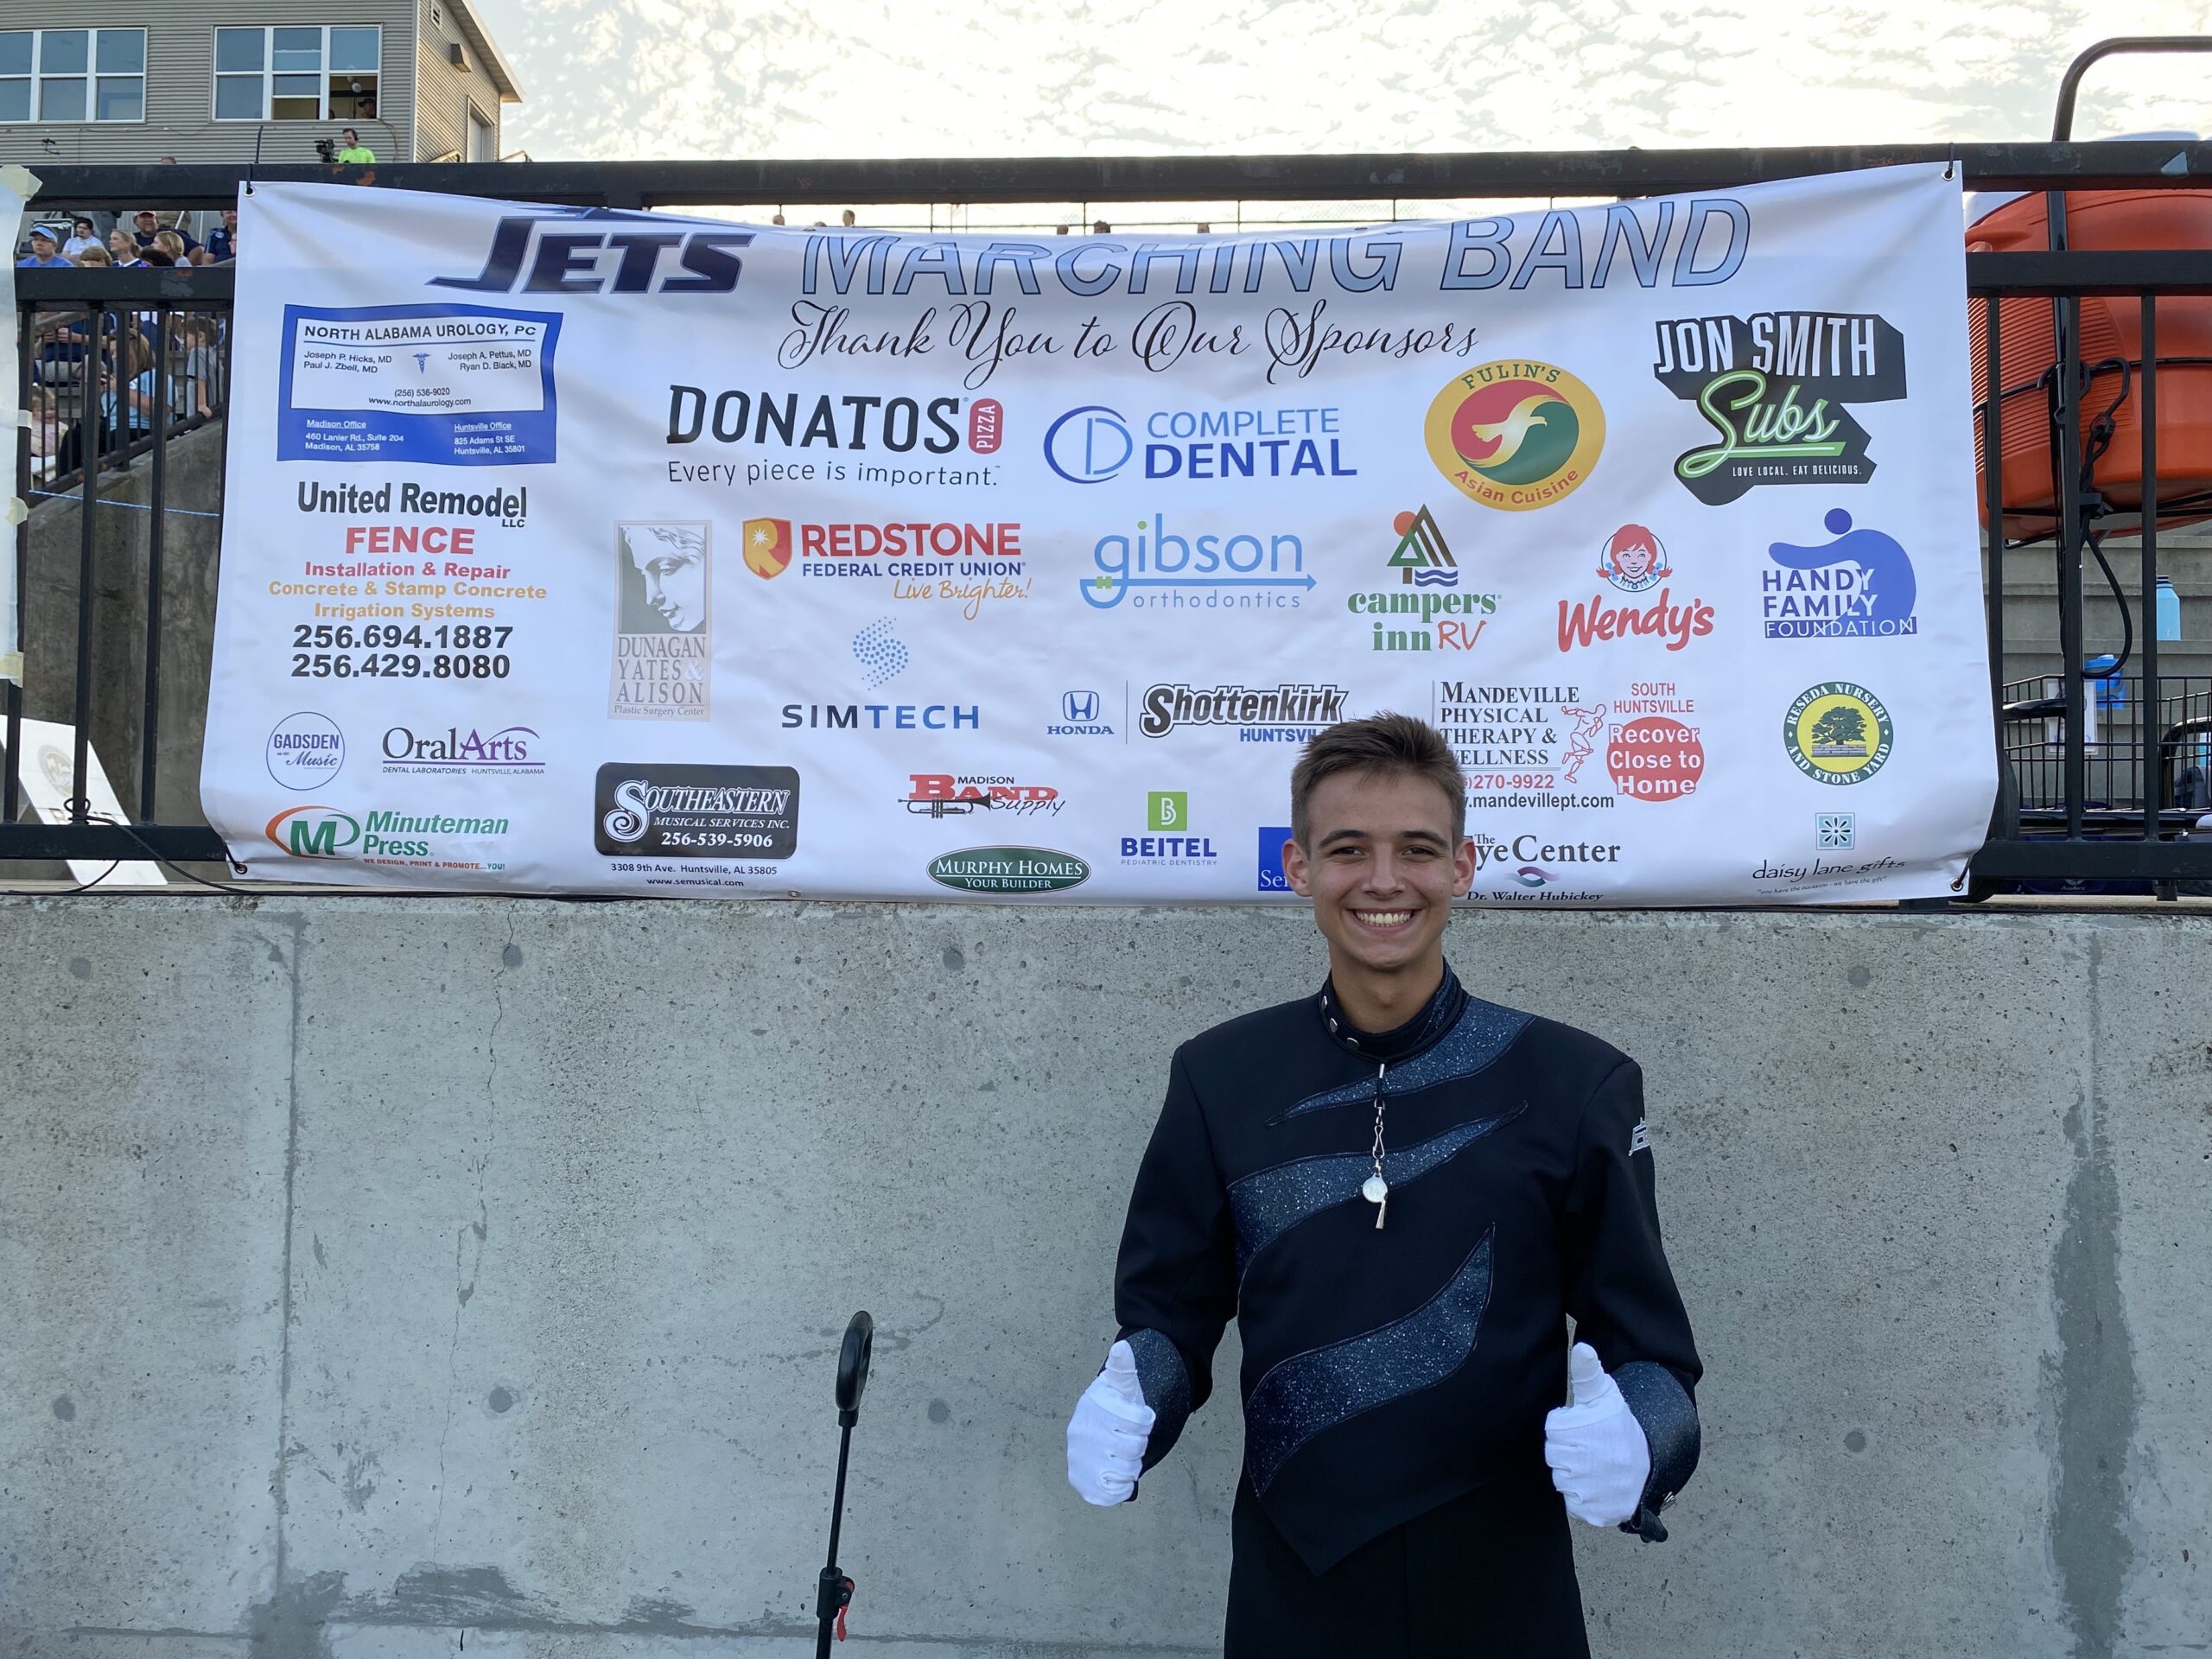 Drum Major with Sponsors banner